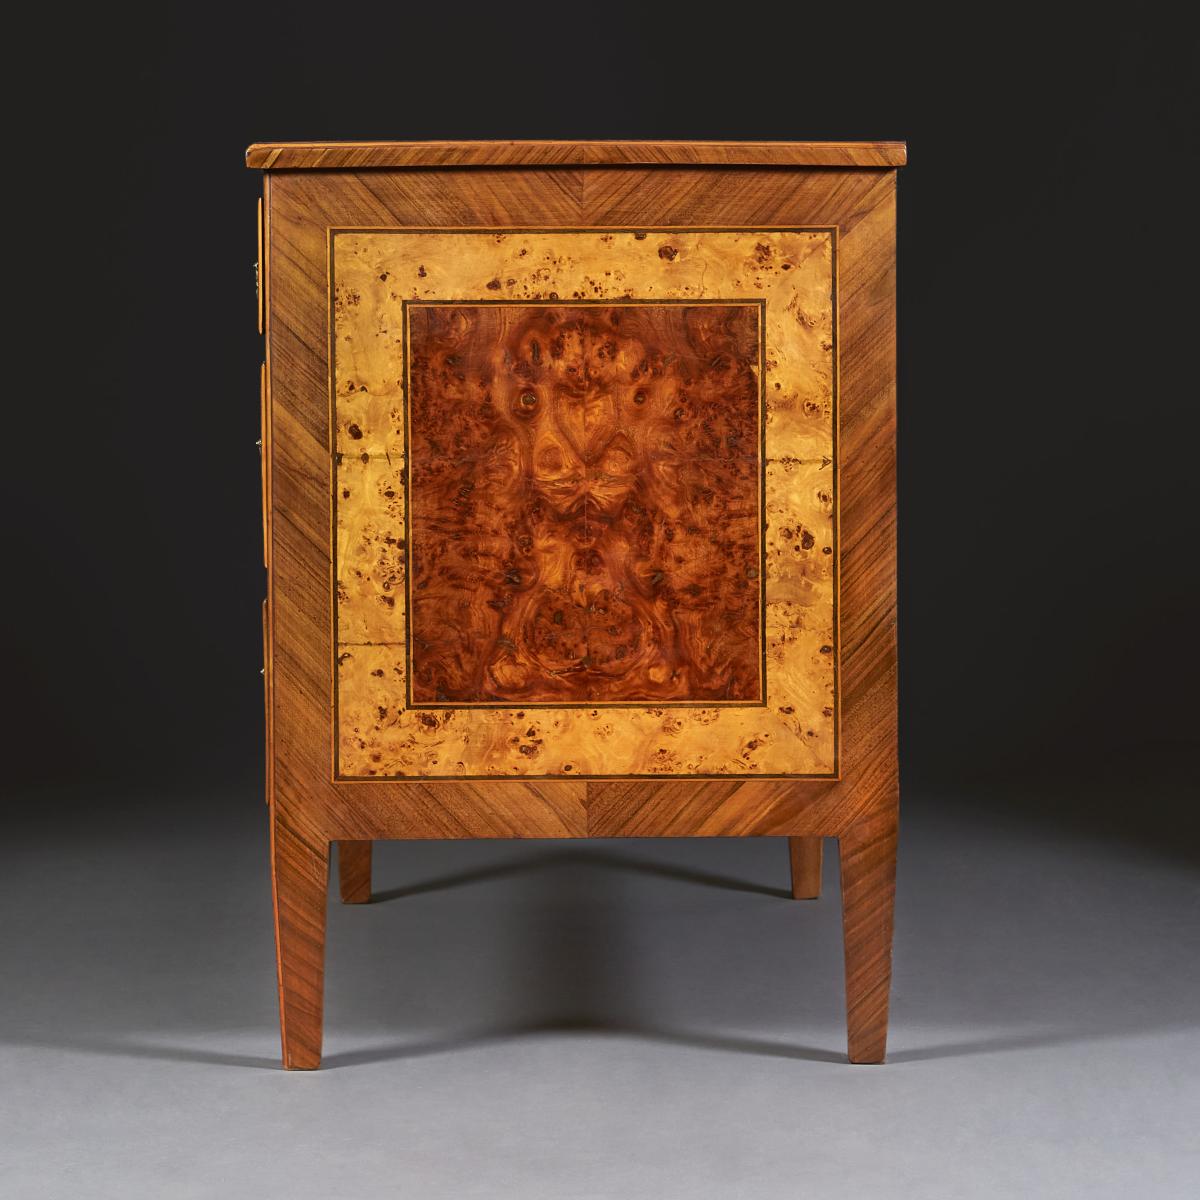 Late 18th Century Burr Wood Commode